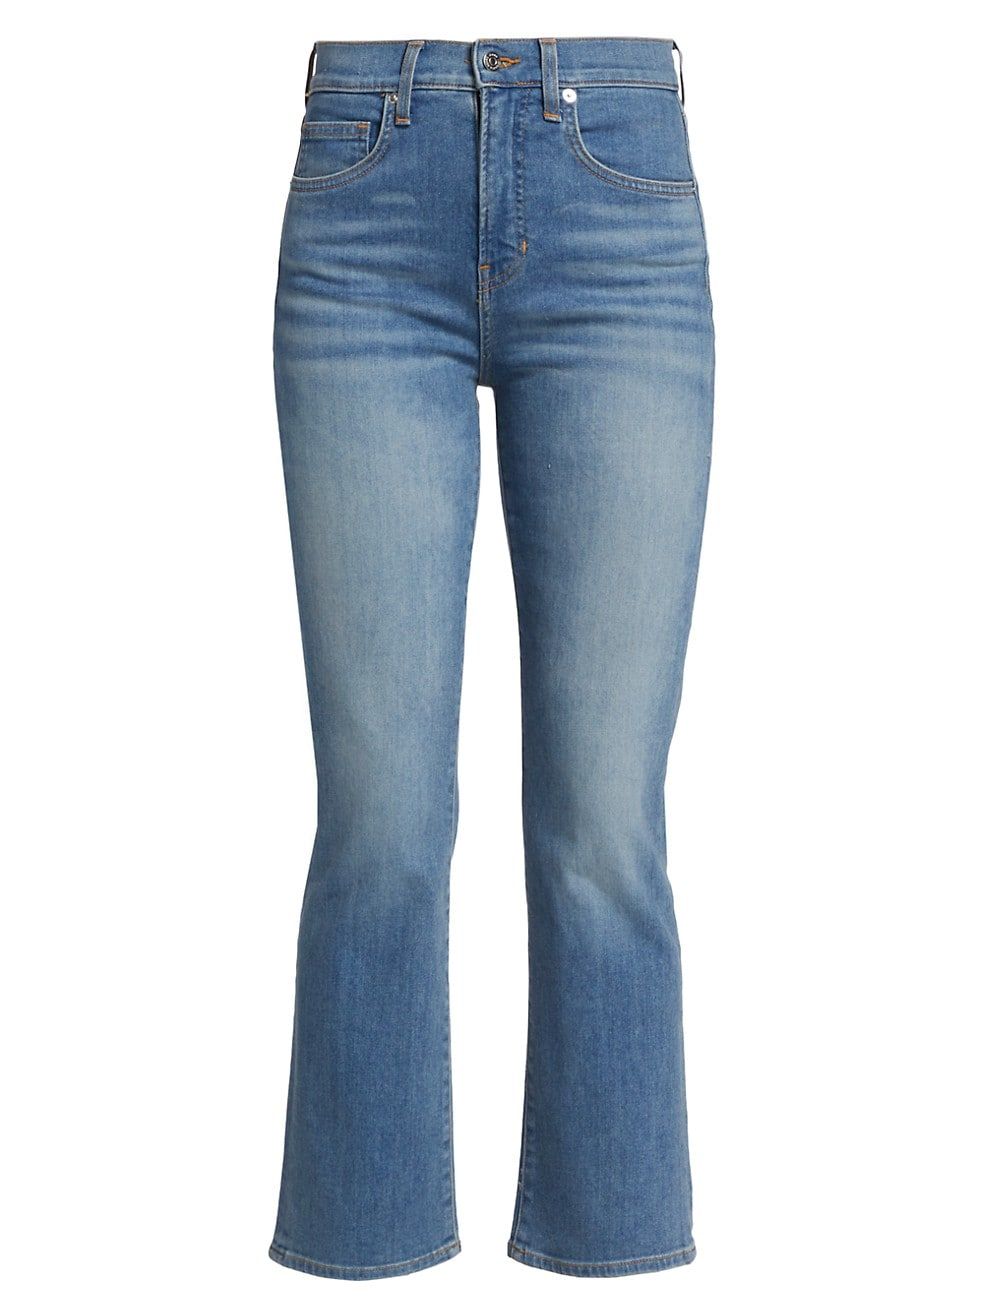 Veronica Beard Carly High-Rise Stretch Straight Crop Jeans | Saks Fifth Avenue